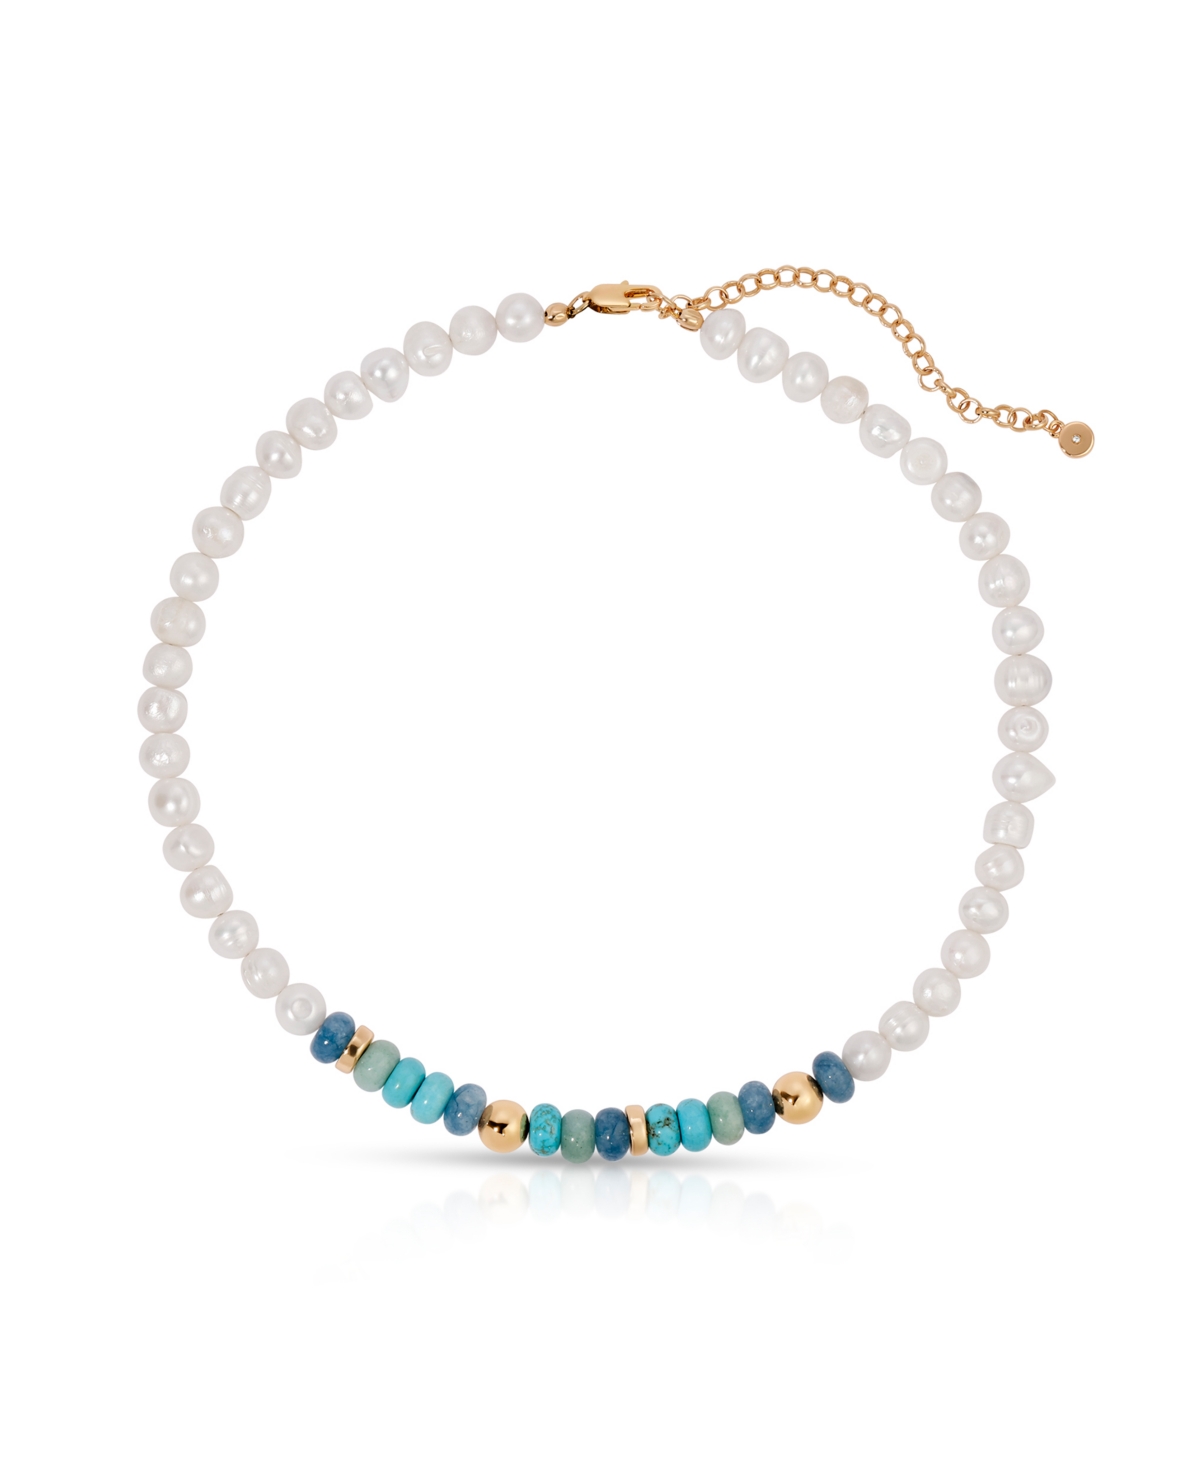 Cultivated Pearl Beaded Blue Mixed Gemstone Necklace - Turquoise